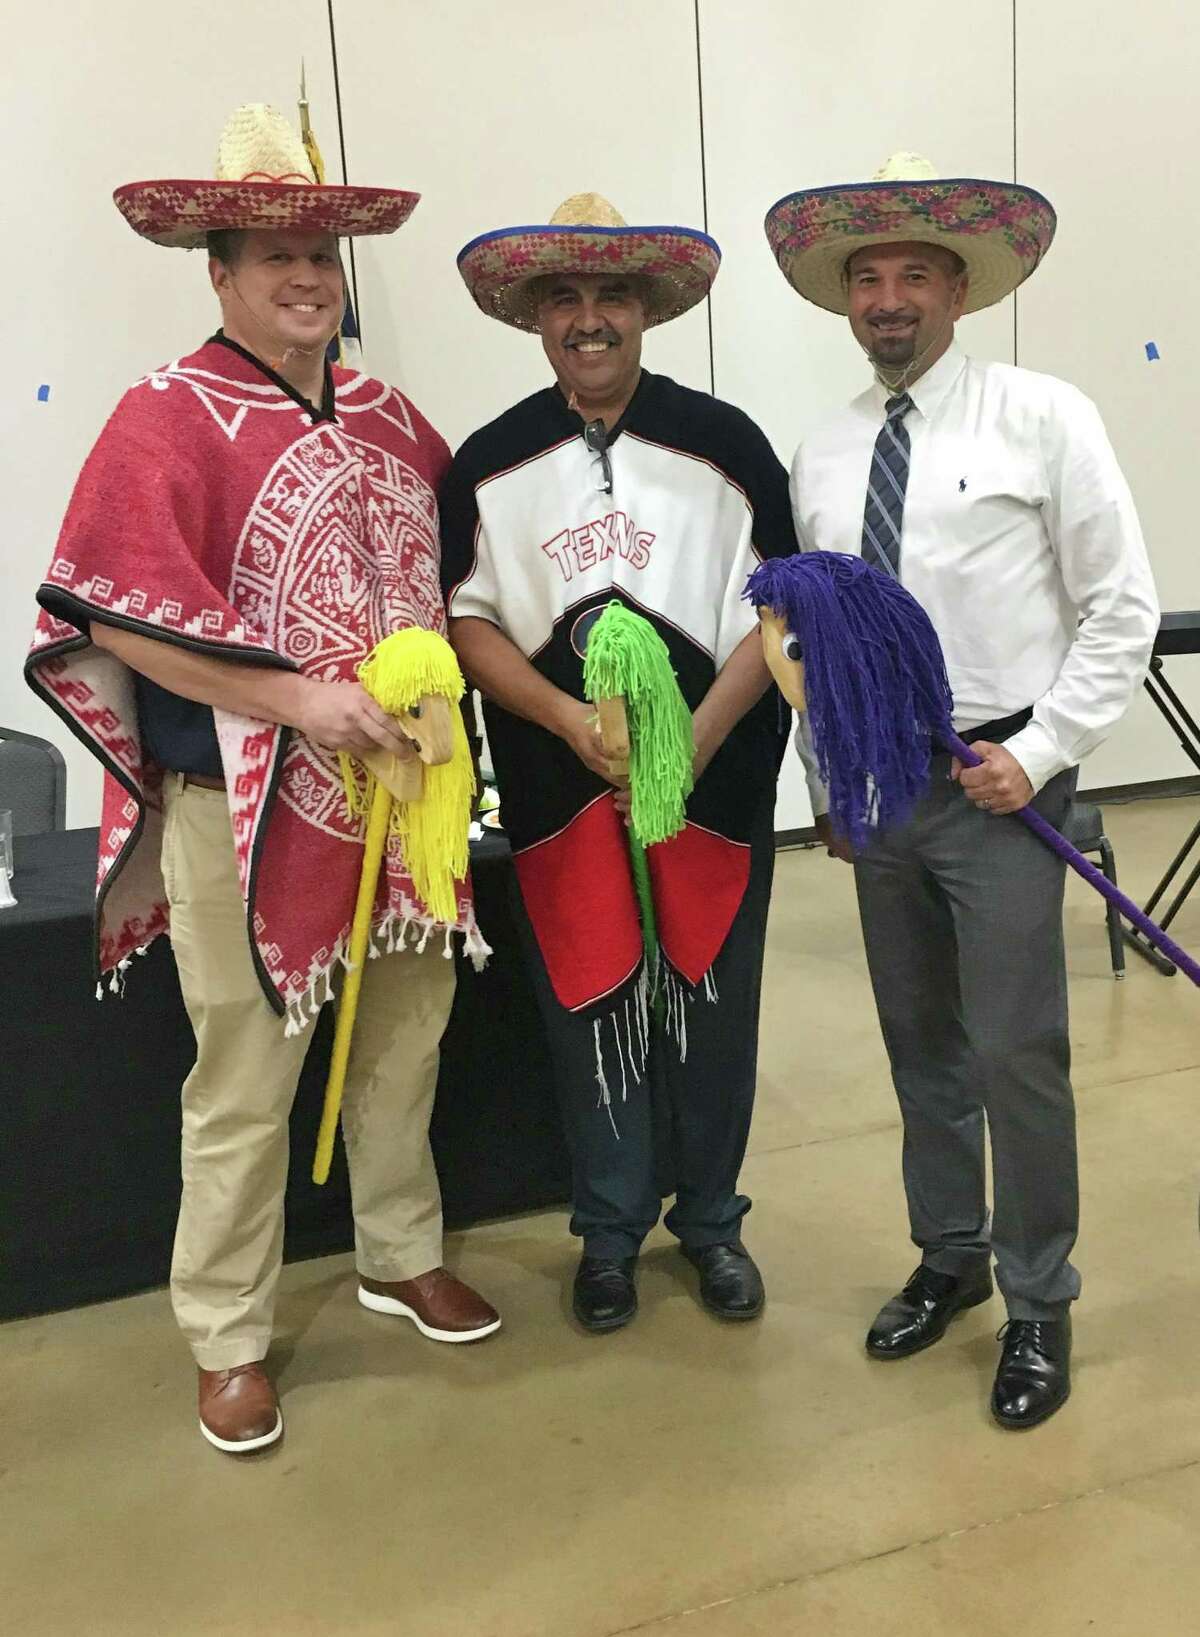 The Three Amigos (club Vice Presidents, l-r, Warner Phelps, Rafael Perez, Steve Williams) rode into the Conroe Noon Lions Club to announce the happenings coming up this week at the club’s annual Dinner/Dance &Auction being held Thursday night at the Lone Star Convention Center.